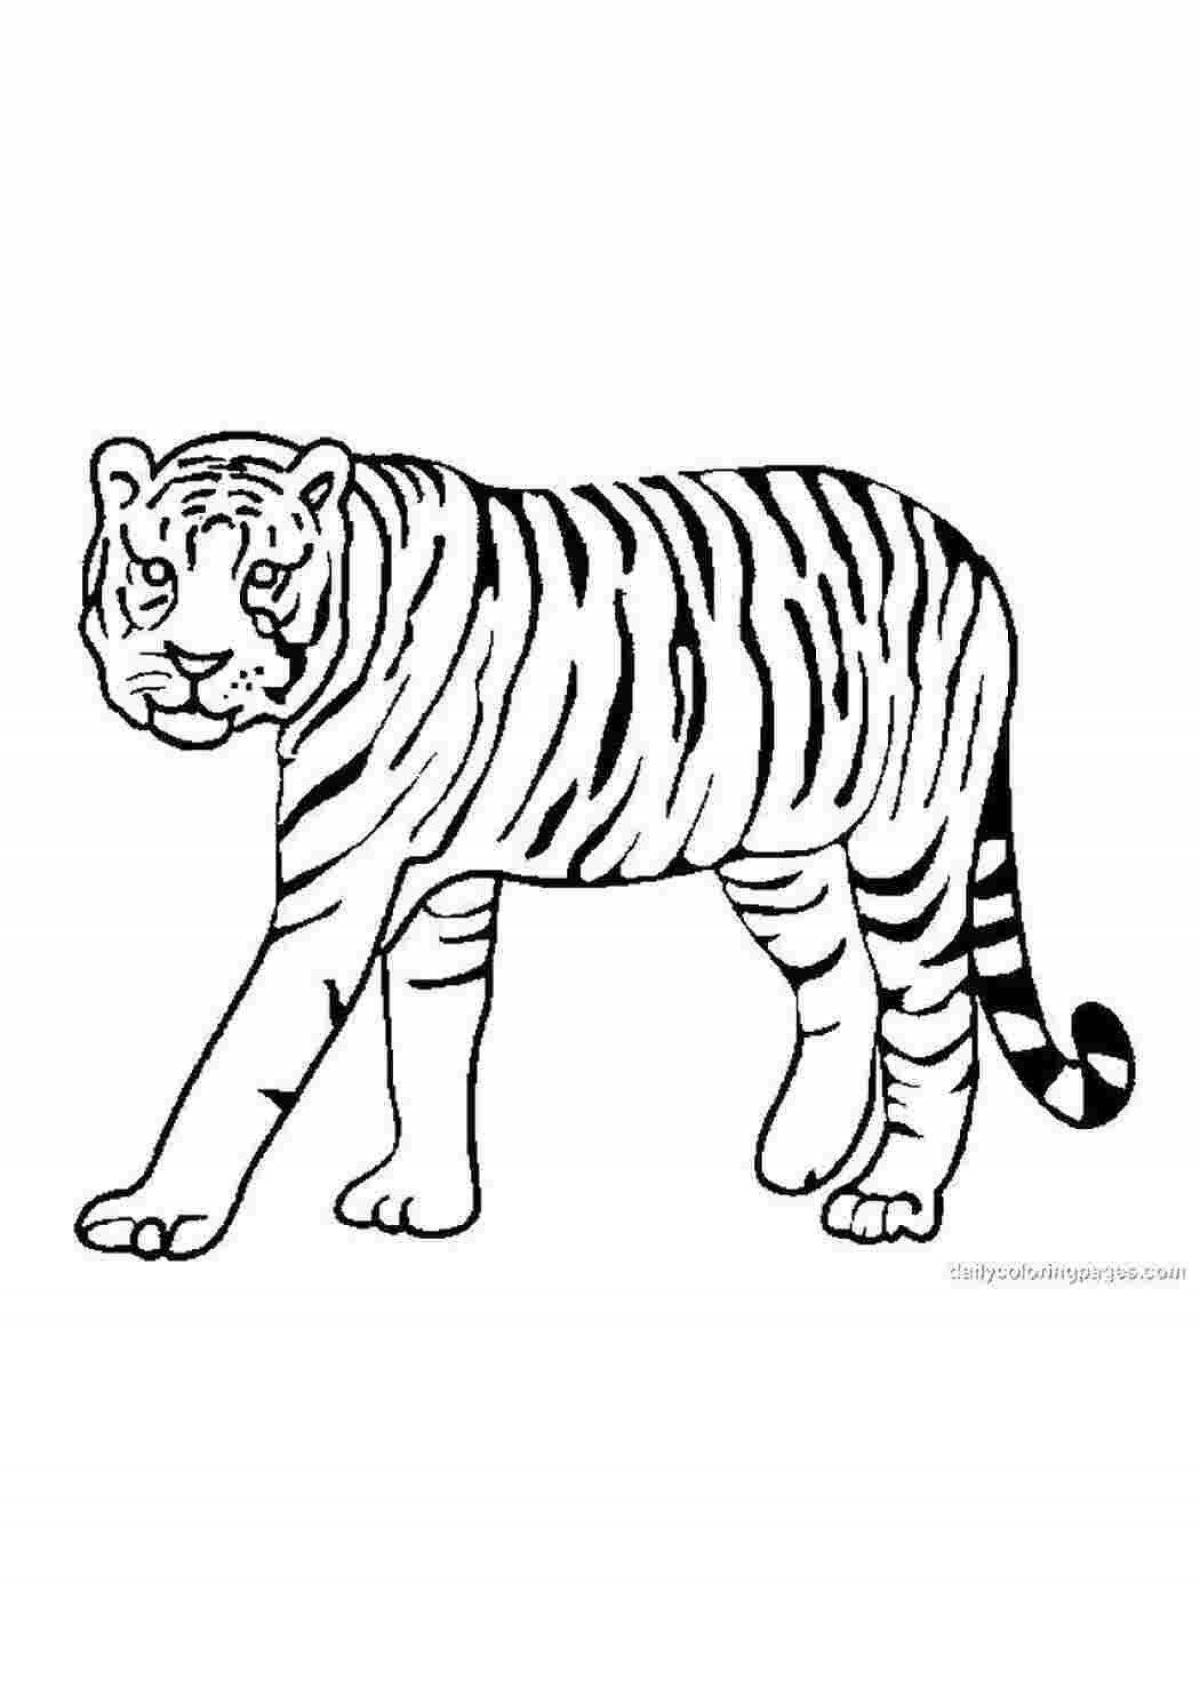 A fascinating tiger coloring book for children 6-7 years old